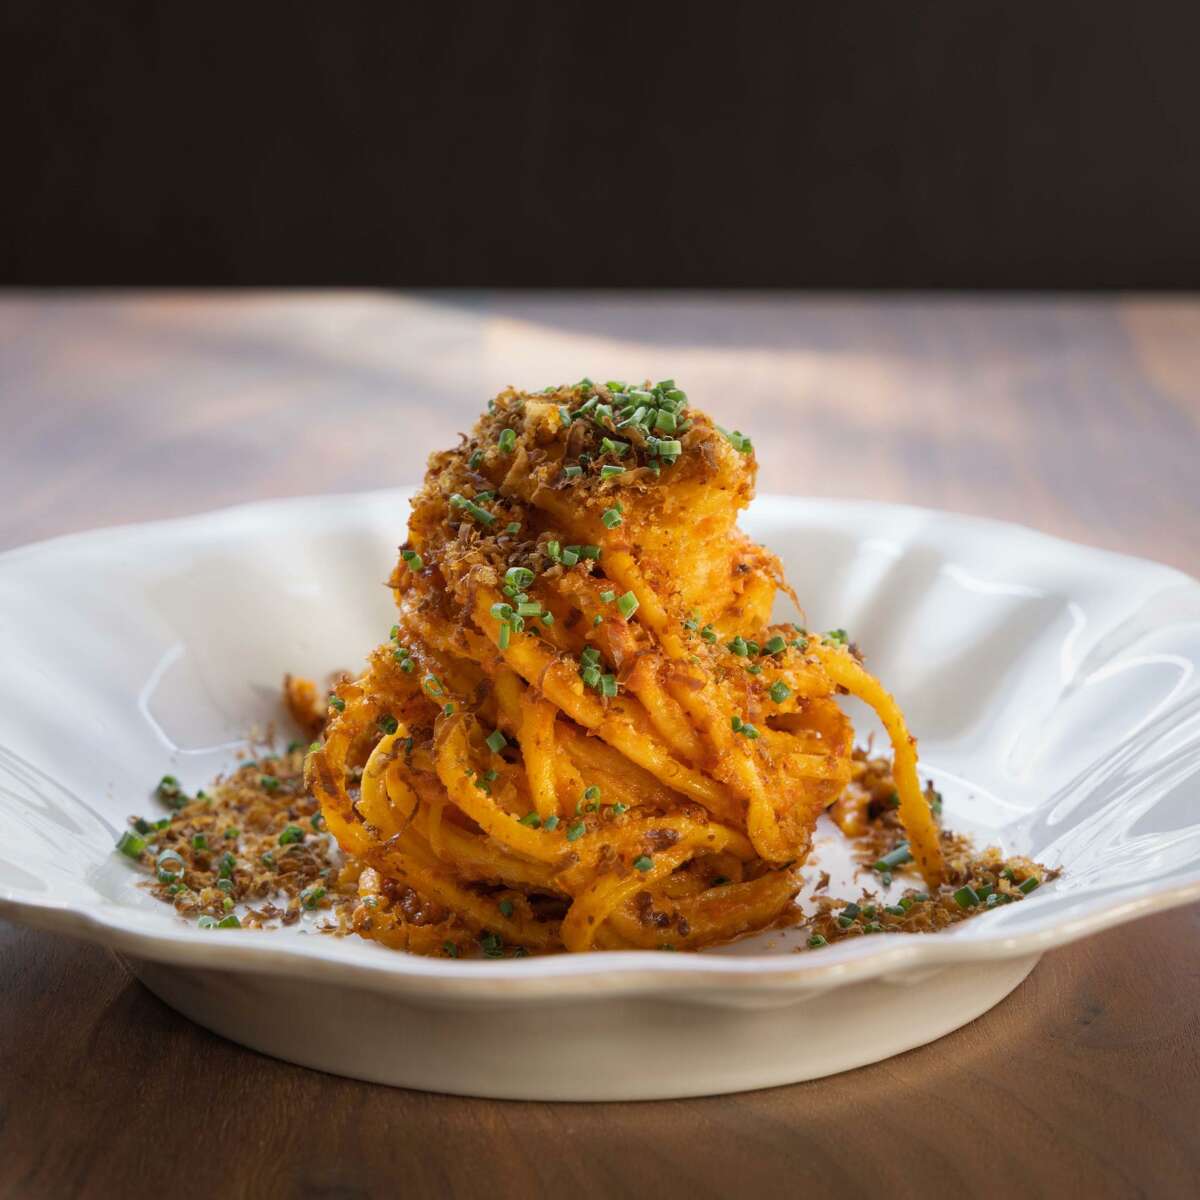 A towering plate of delicious pasta from Sorella, part of the Acquerello family.